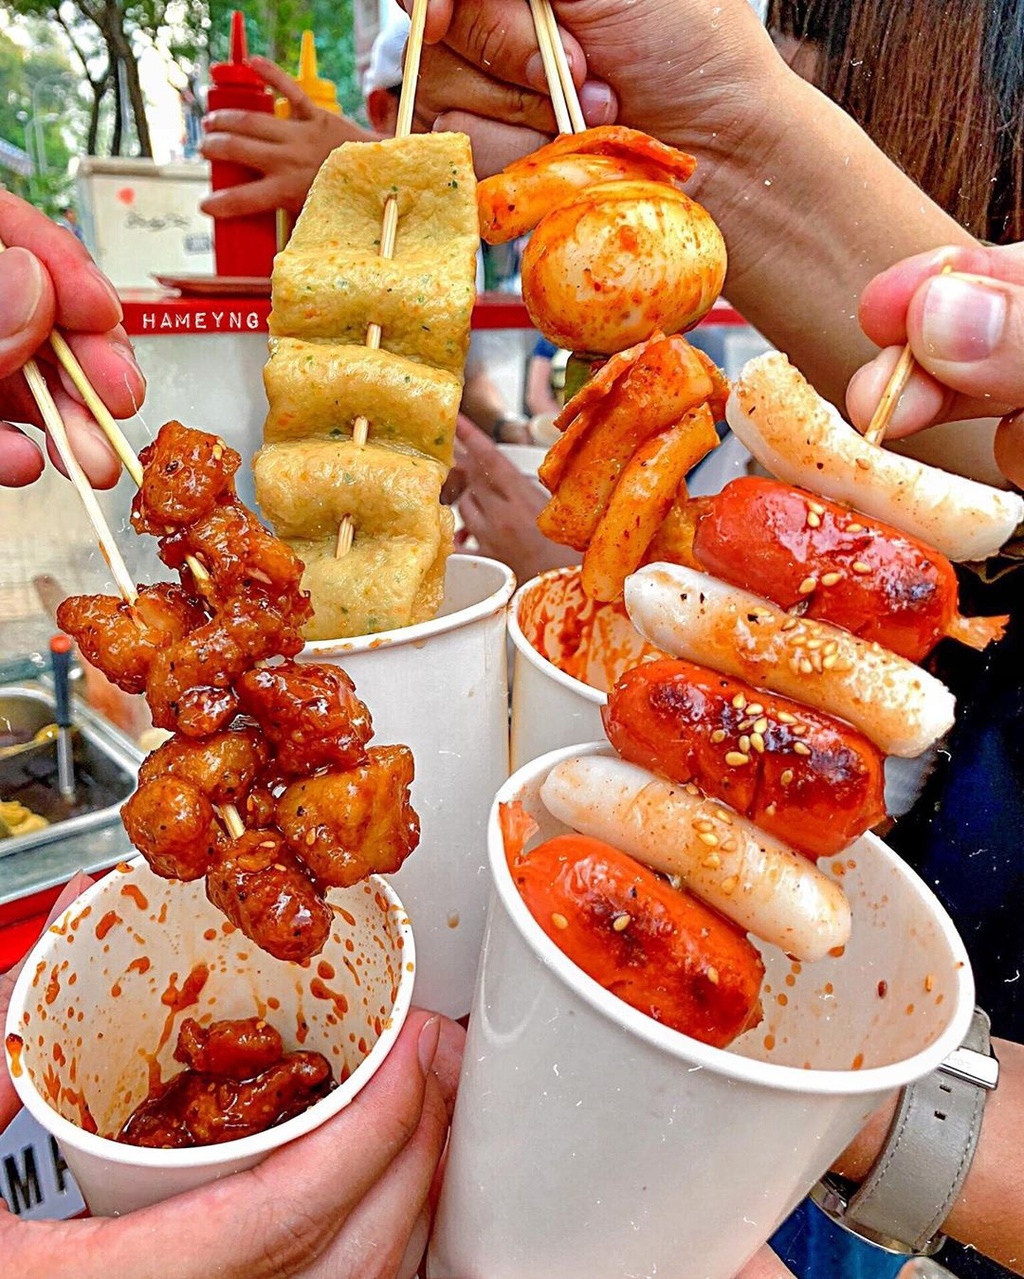 Korean style skewers are an unmissable snack that can be found throughout the street. (Photo: Onghoangtrasua)